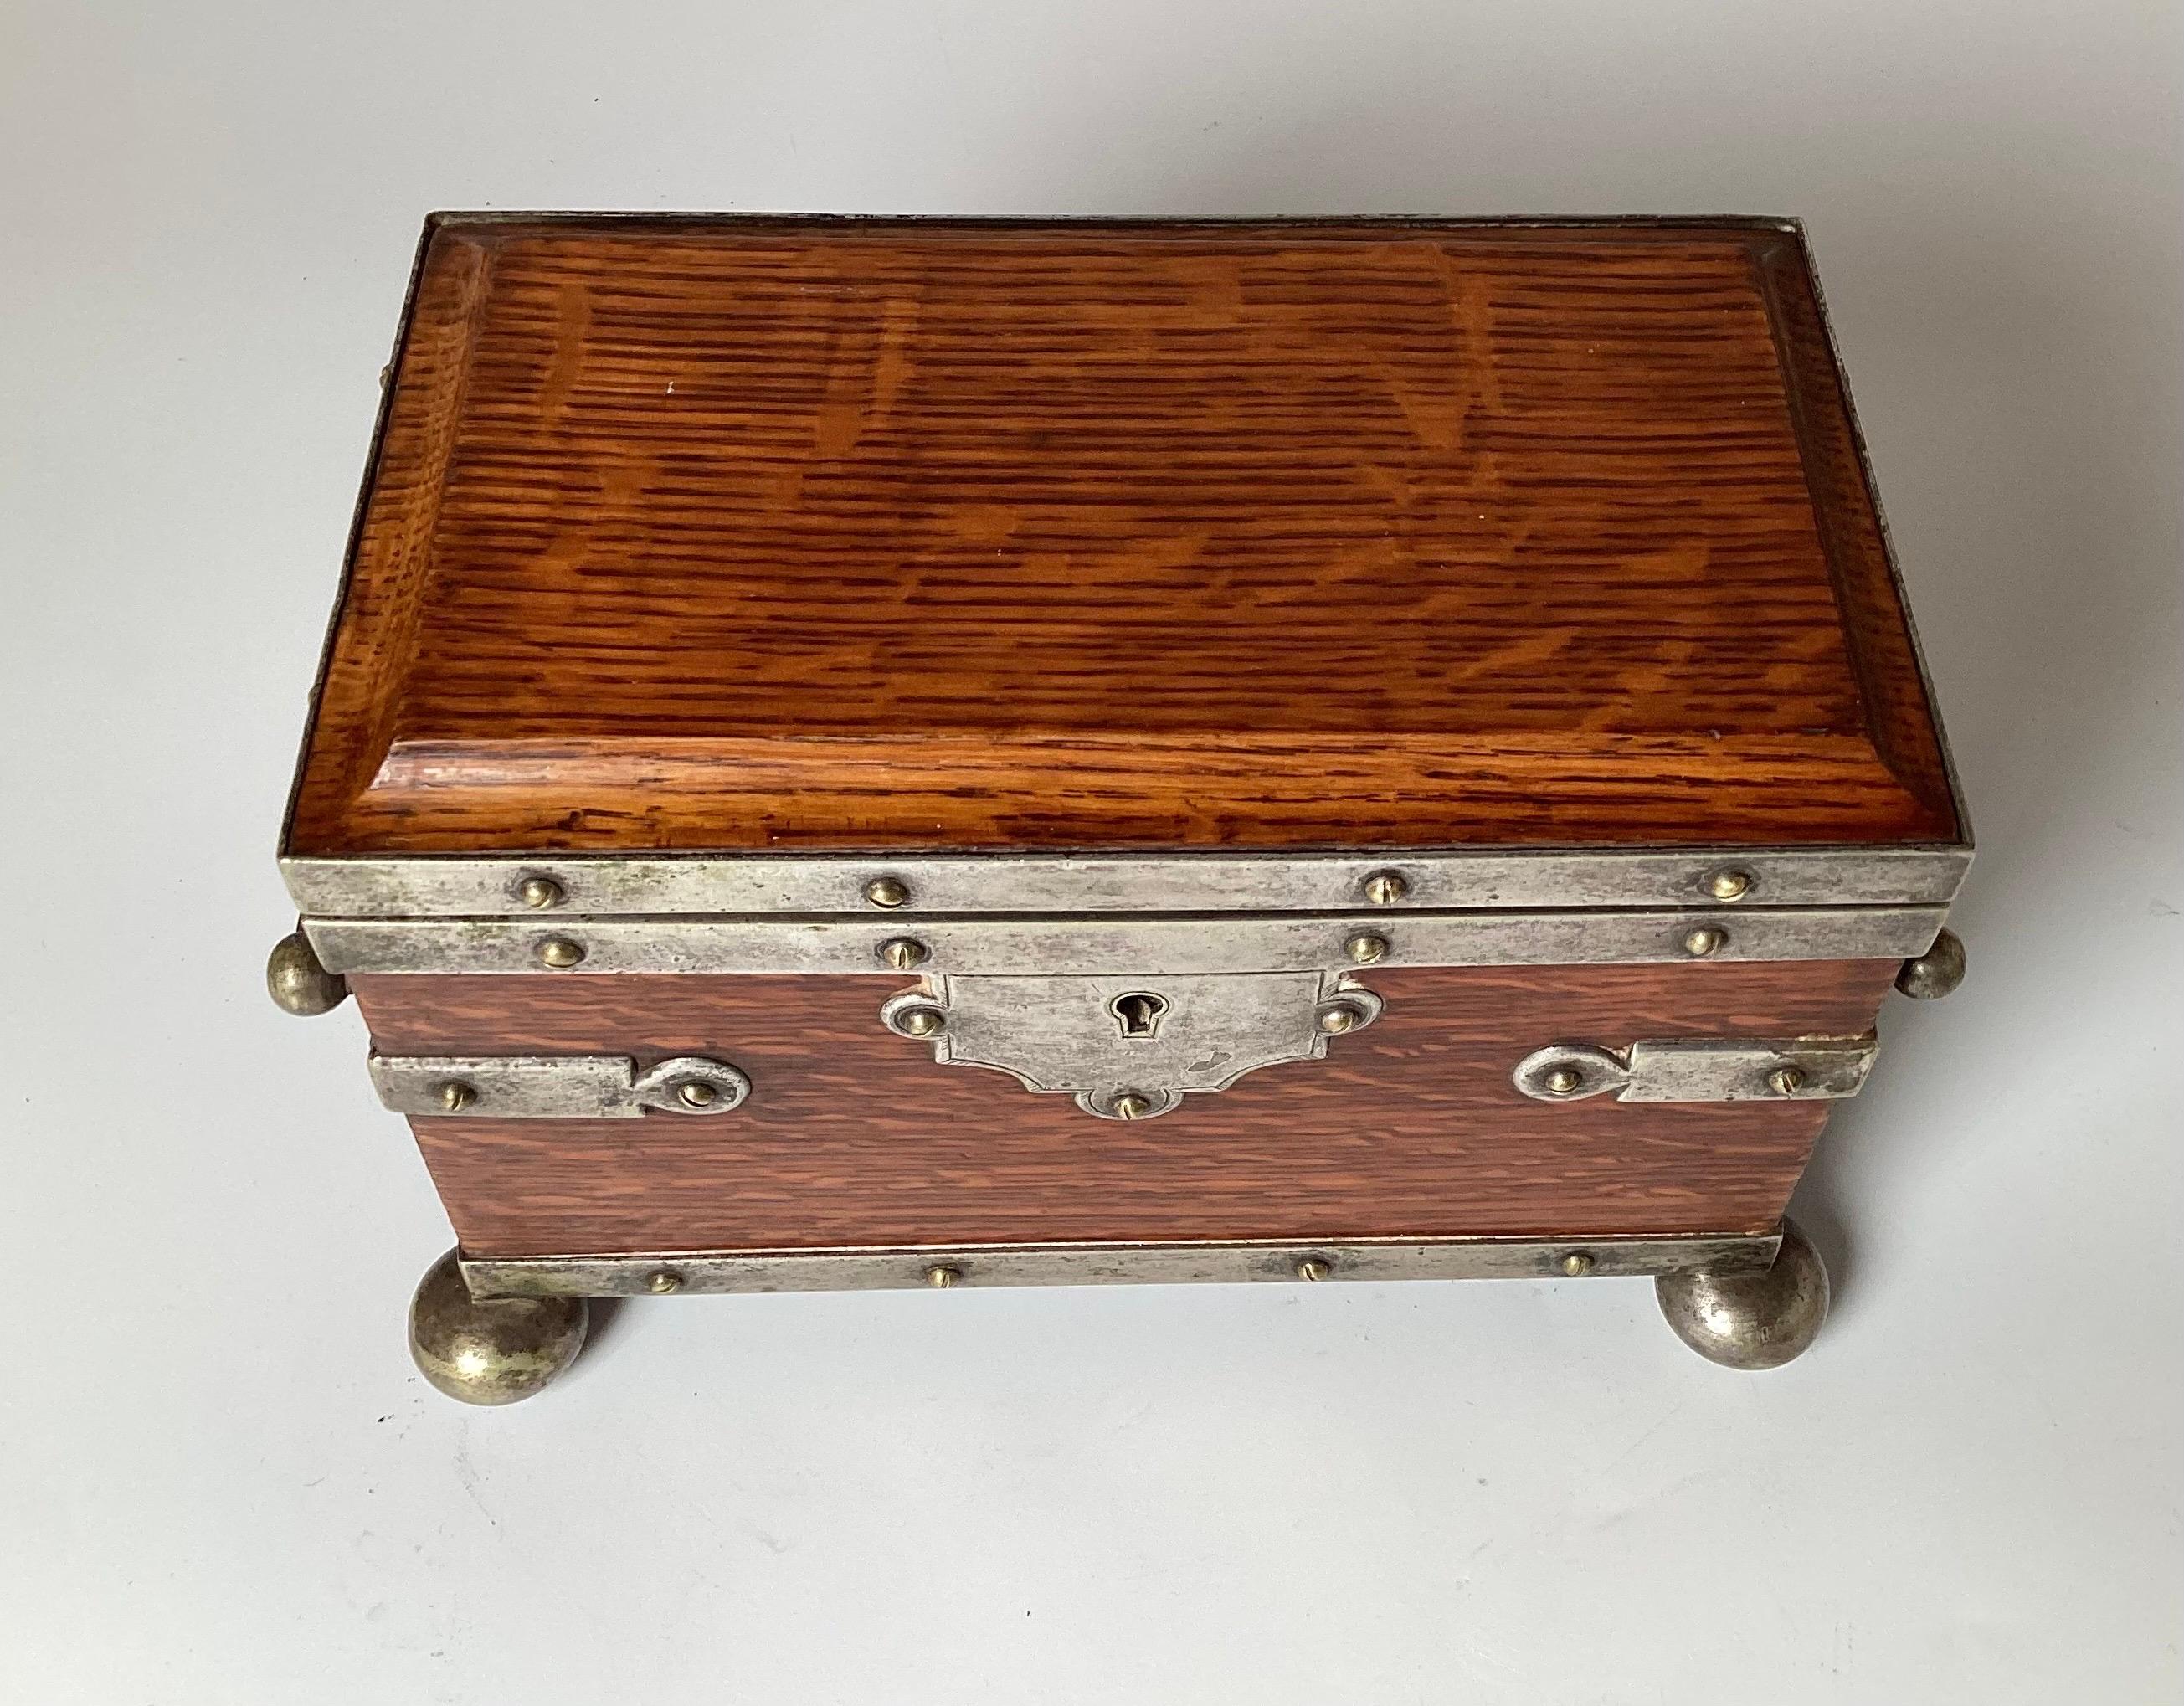 Mid 19th century English silver-plate and solid oak two handled tea caddy. The interior with two compartments with the foil lining replaced. With original key.